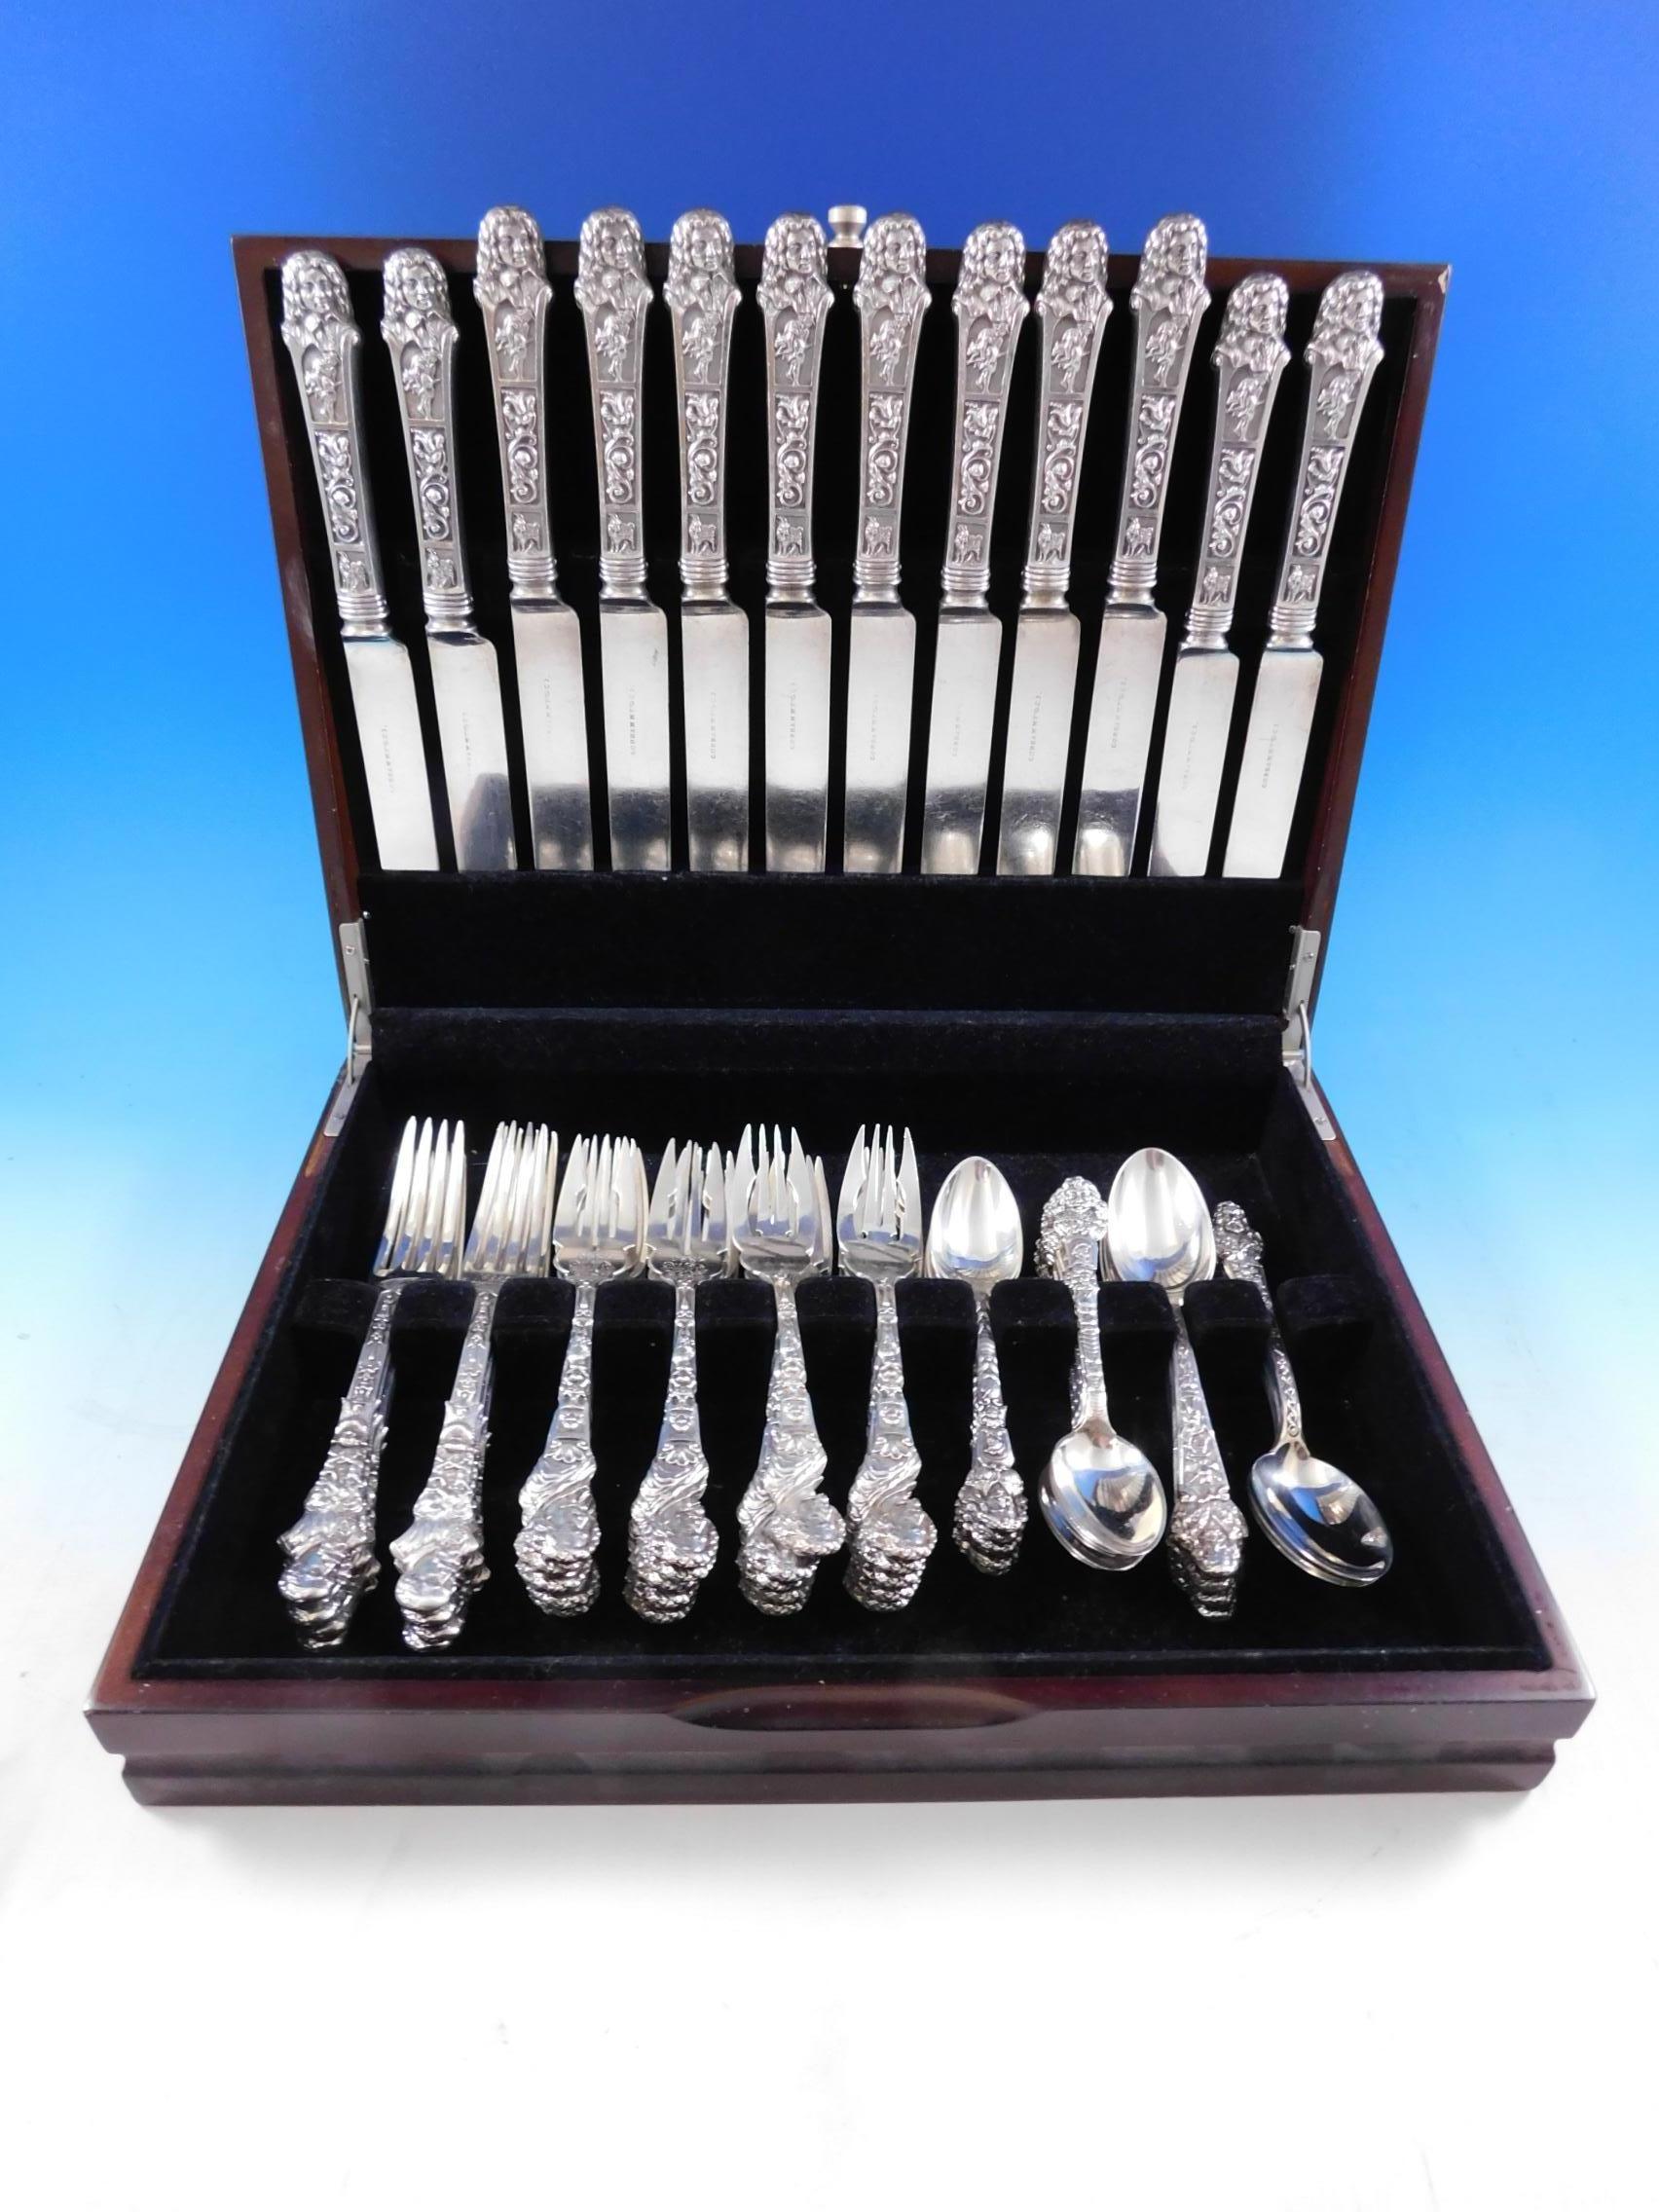 Superb multi-motif figural Old Masters by Gorham, circa 1885, sterling silver flatware set, 58 pieces. This highly sought after and incredibly scarce pattern features busts of the masters of art, in an exquisite finely detailed sculptural